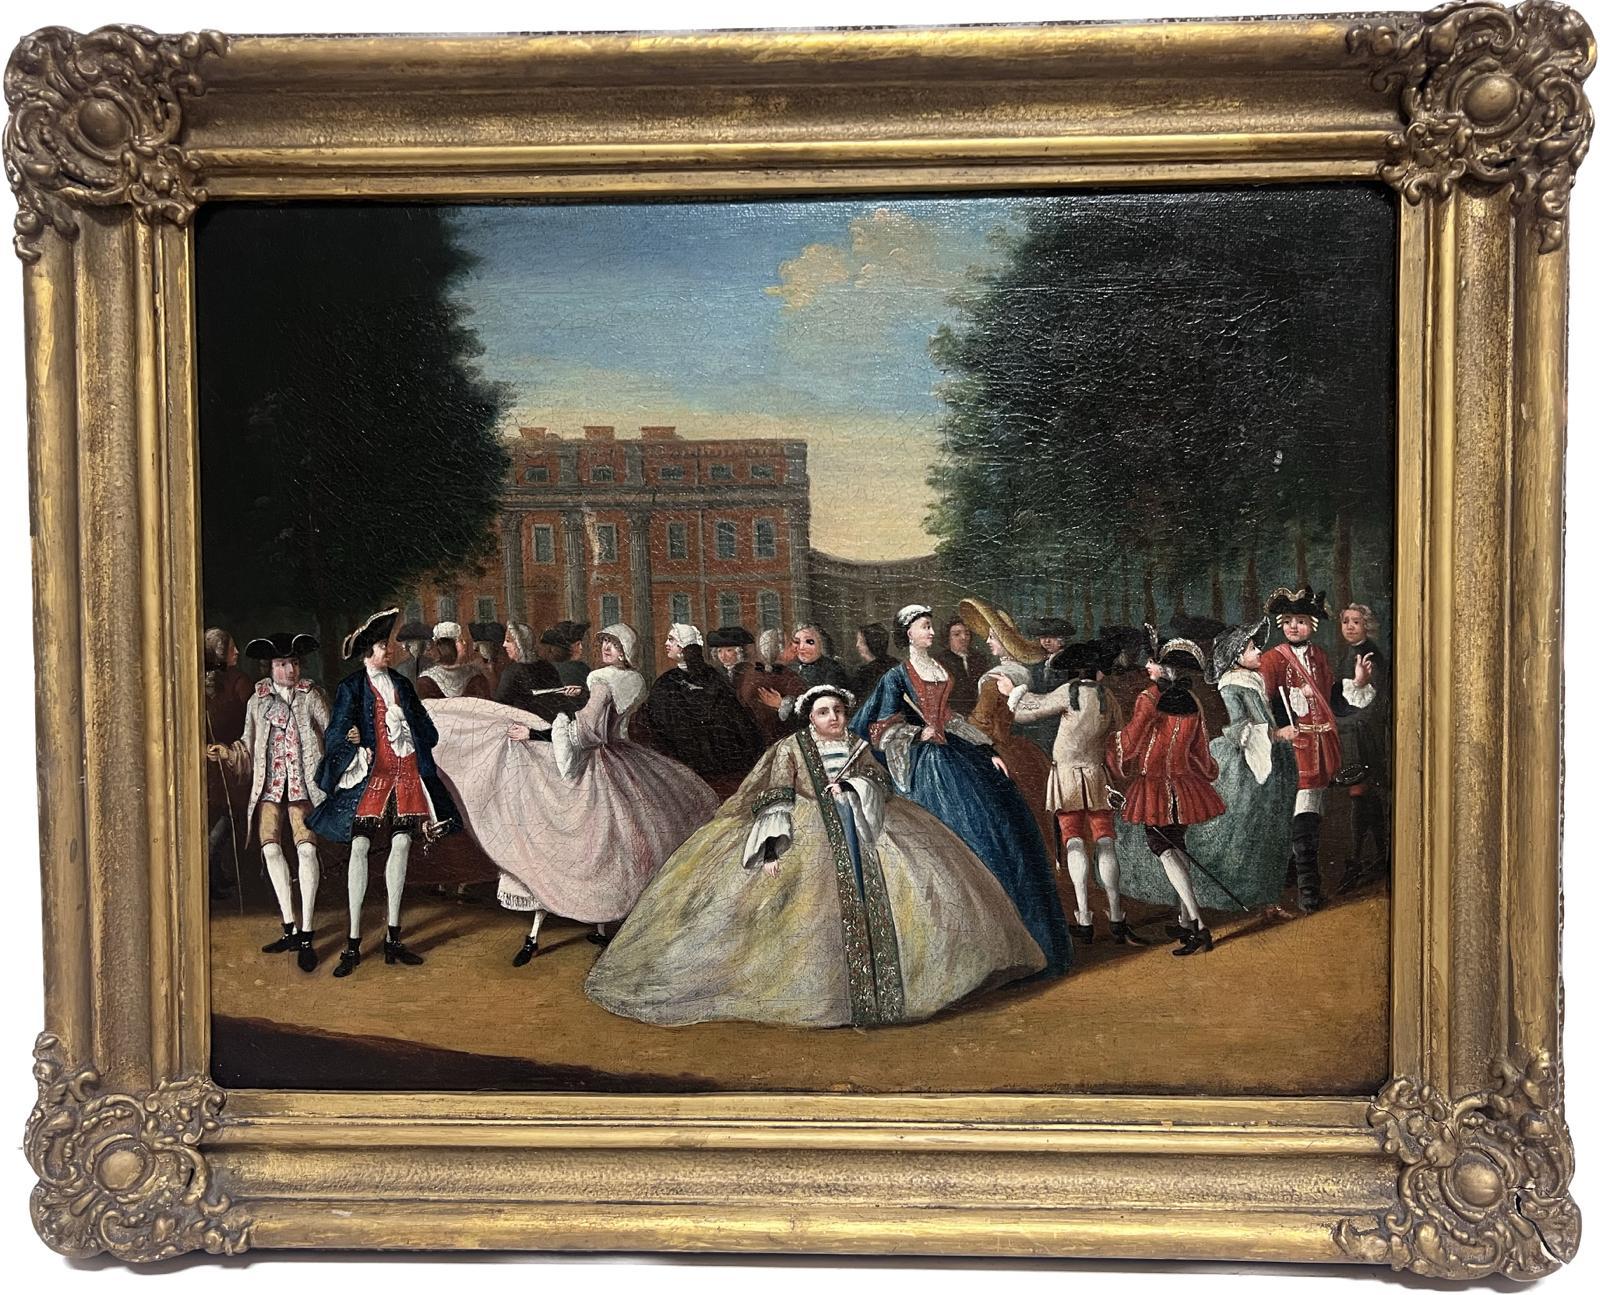 18th Century English Stately Home Figures Partying in Garden Very Rare Oil  - Painting by William Hogarth